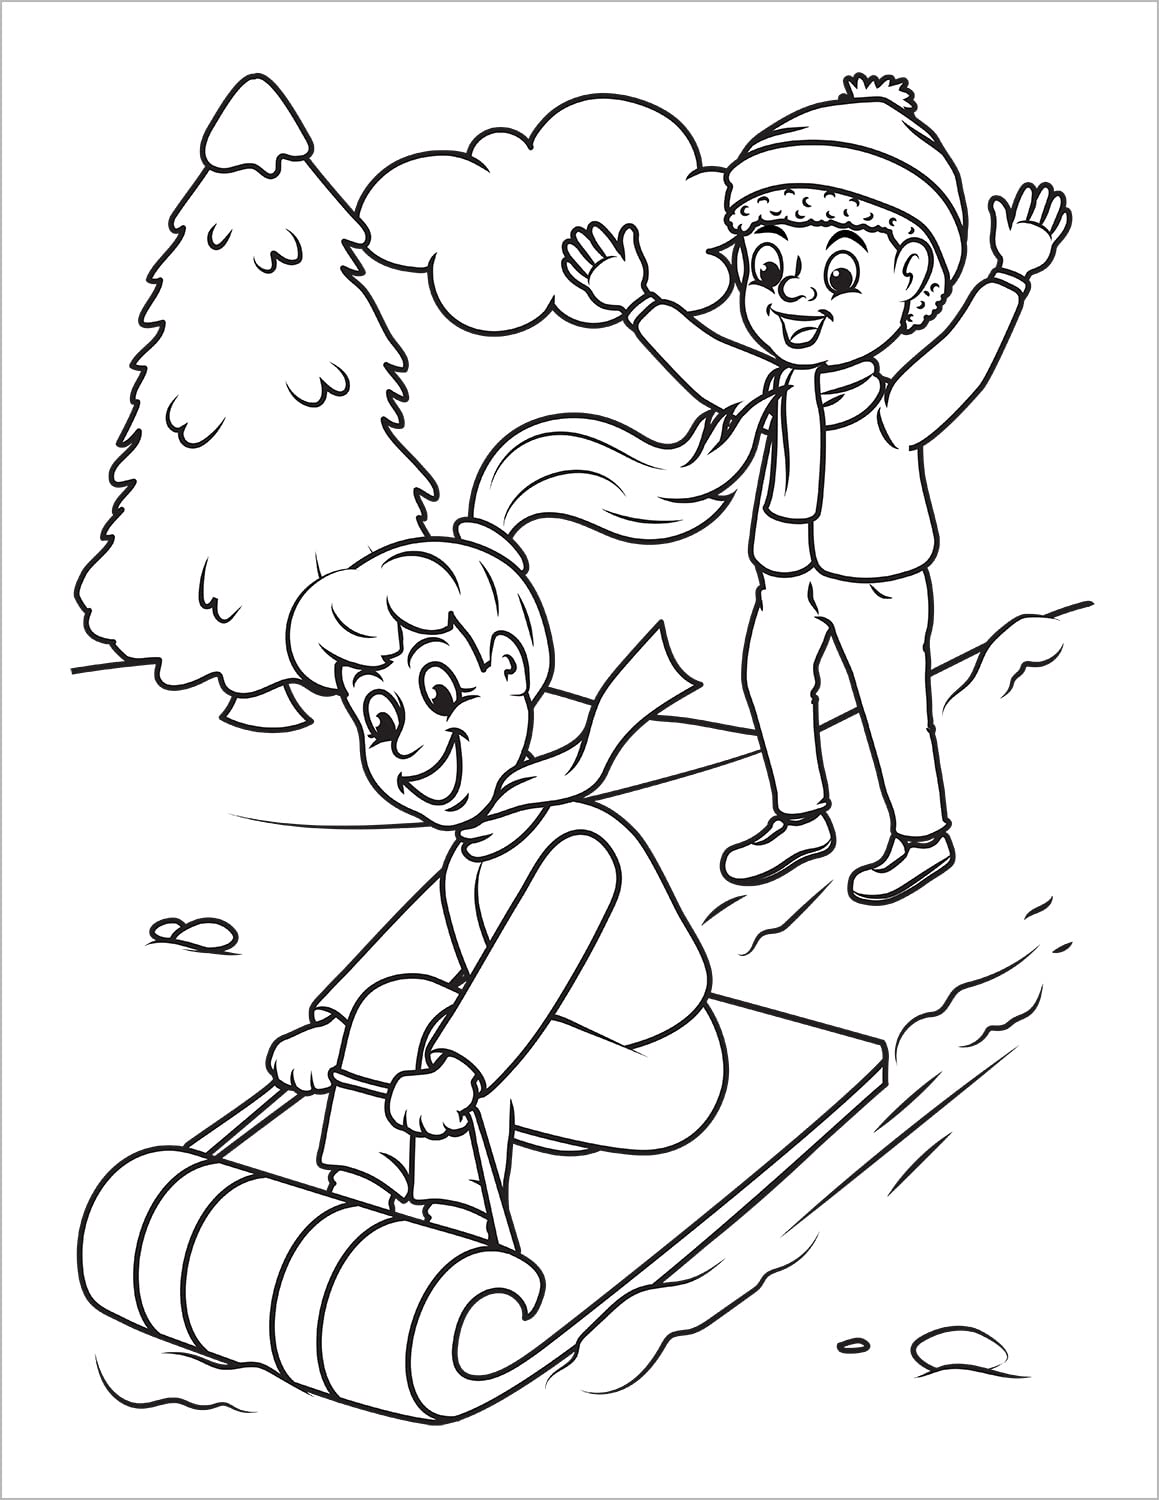 sledding coloring pages for kids